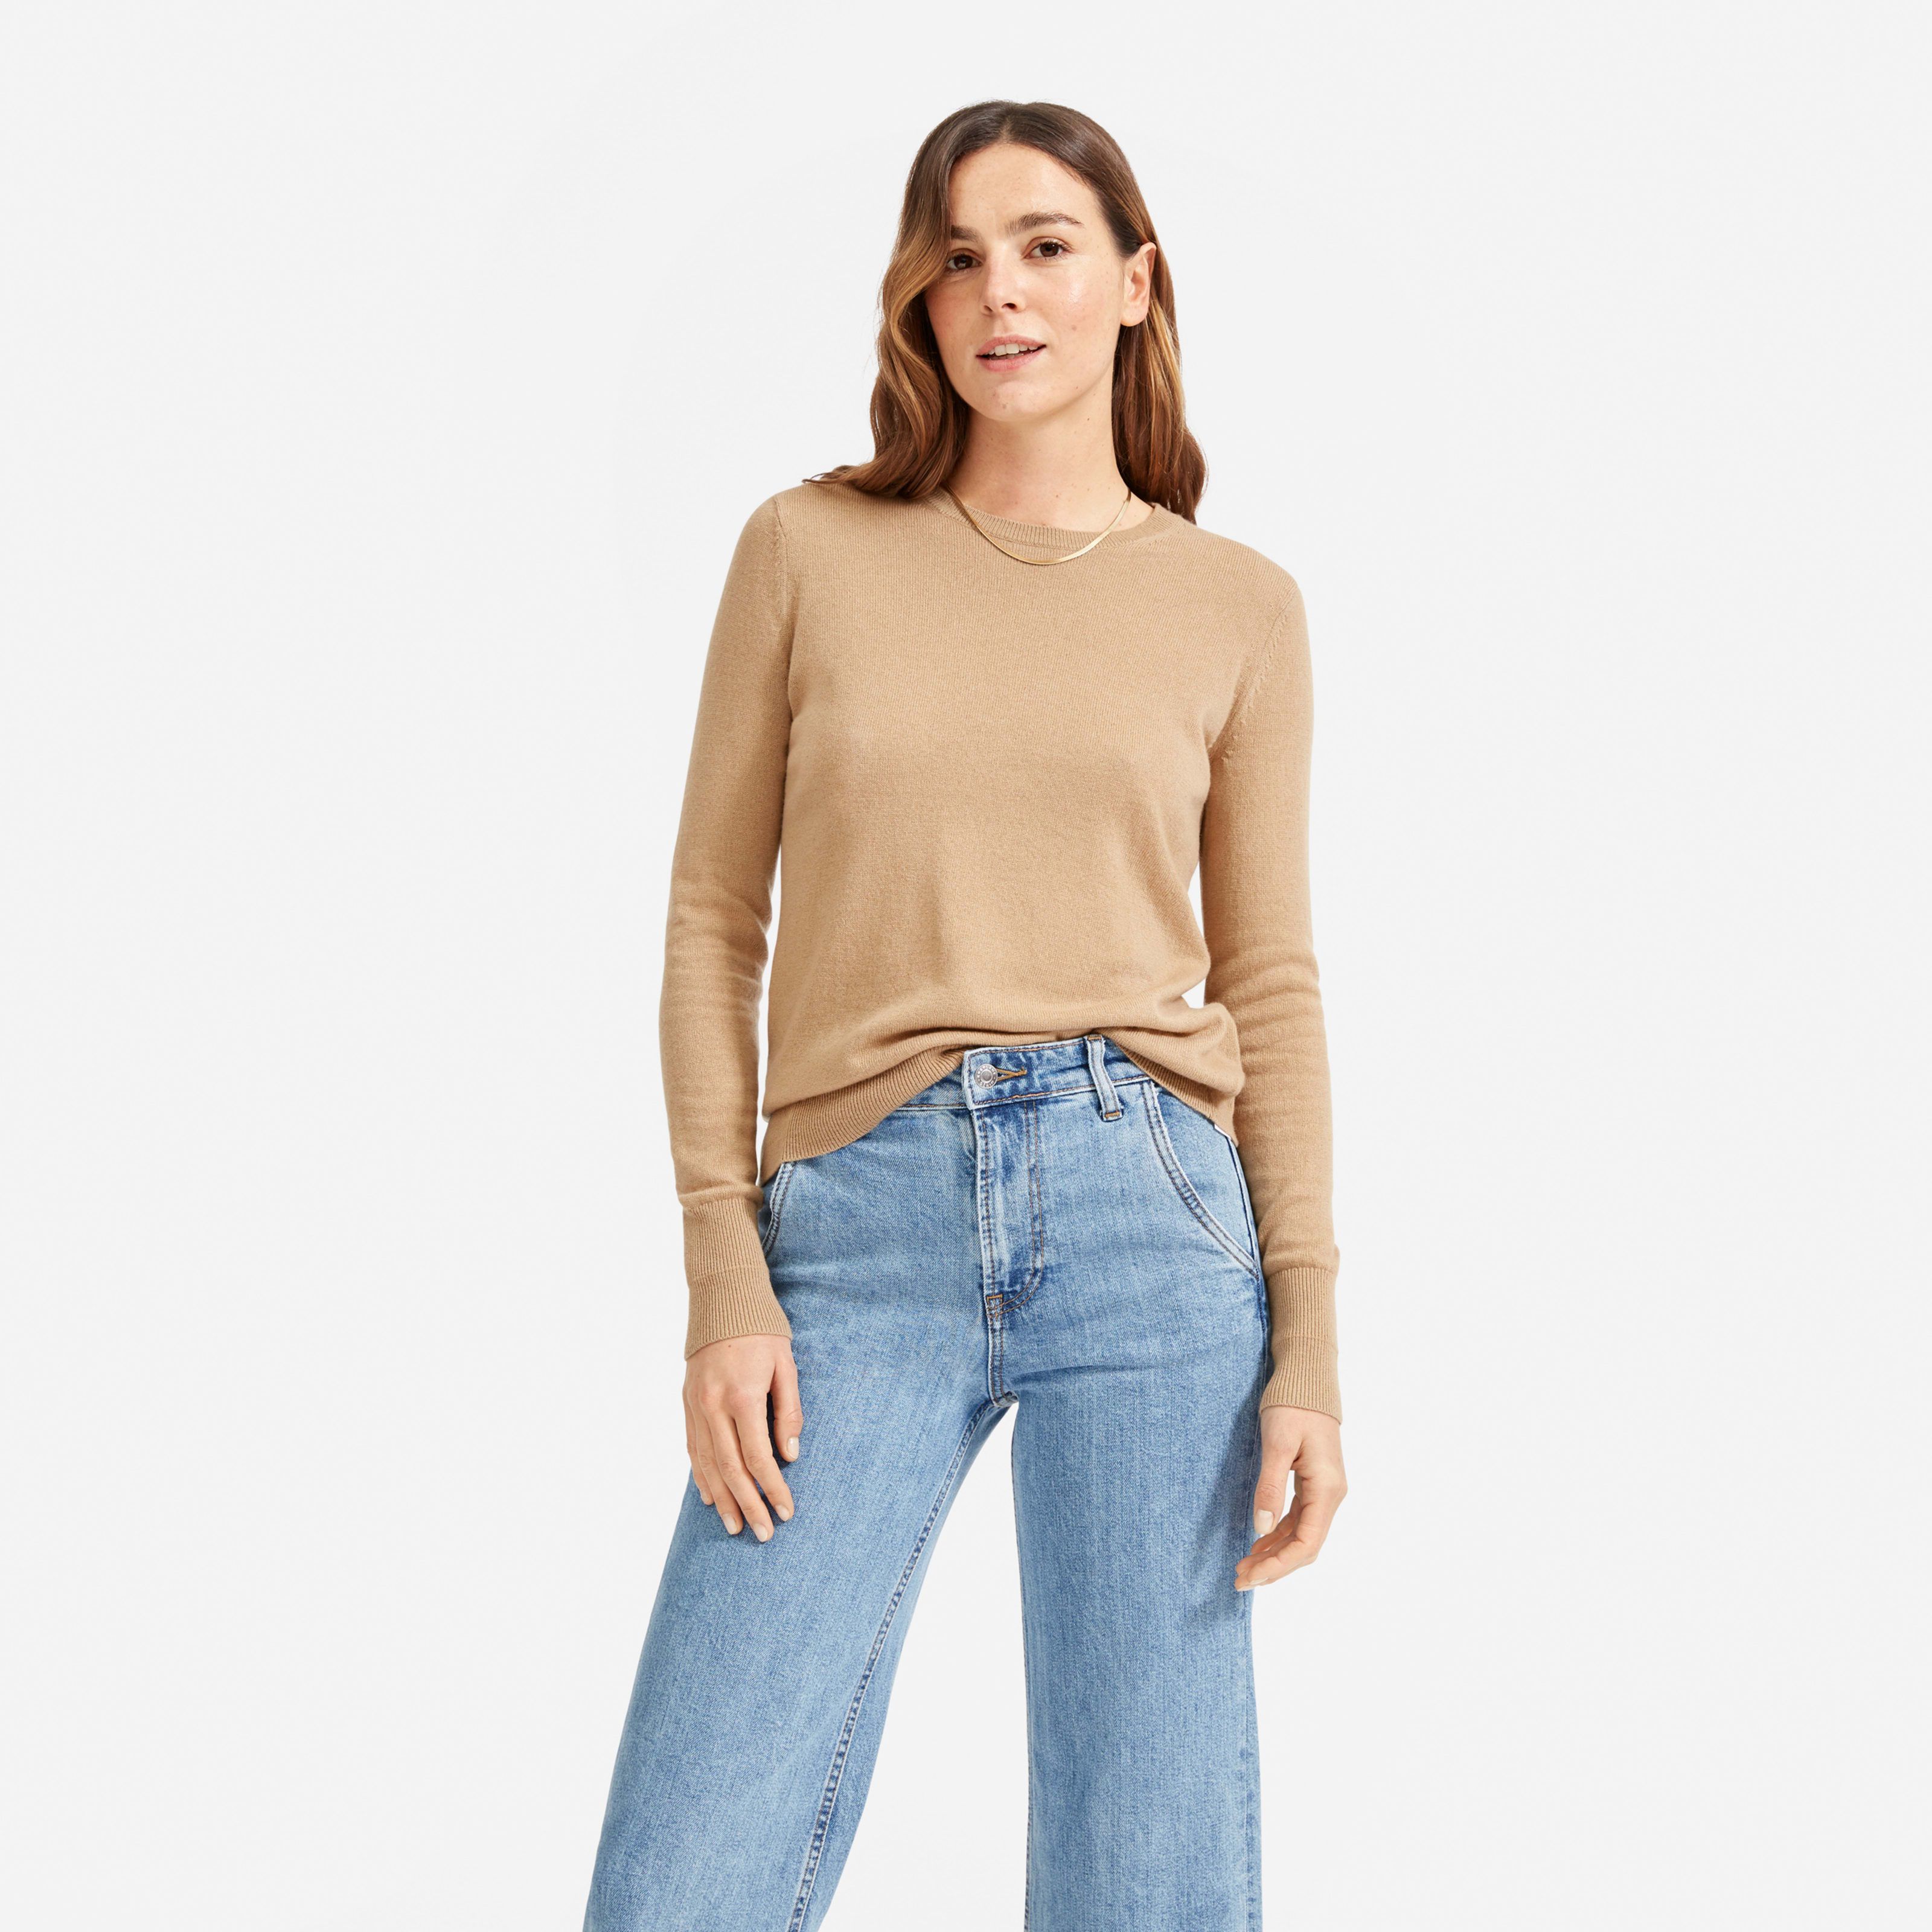 Women's Cashmere Crew Sweater by Everlane in Camel, Size XL | Everlane